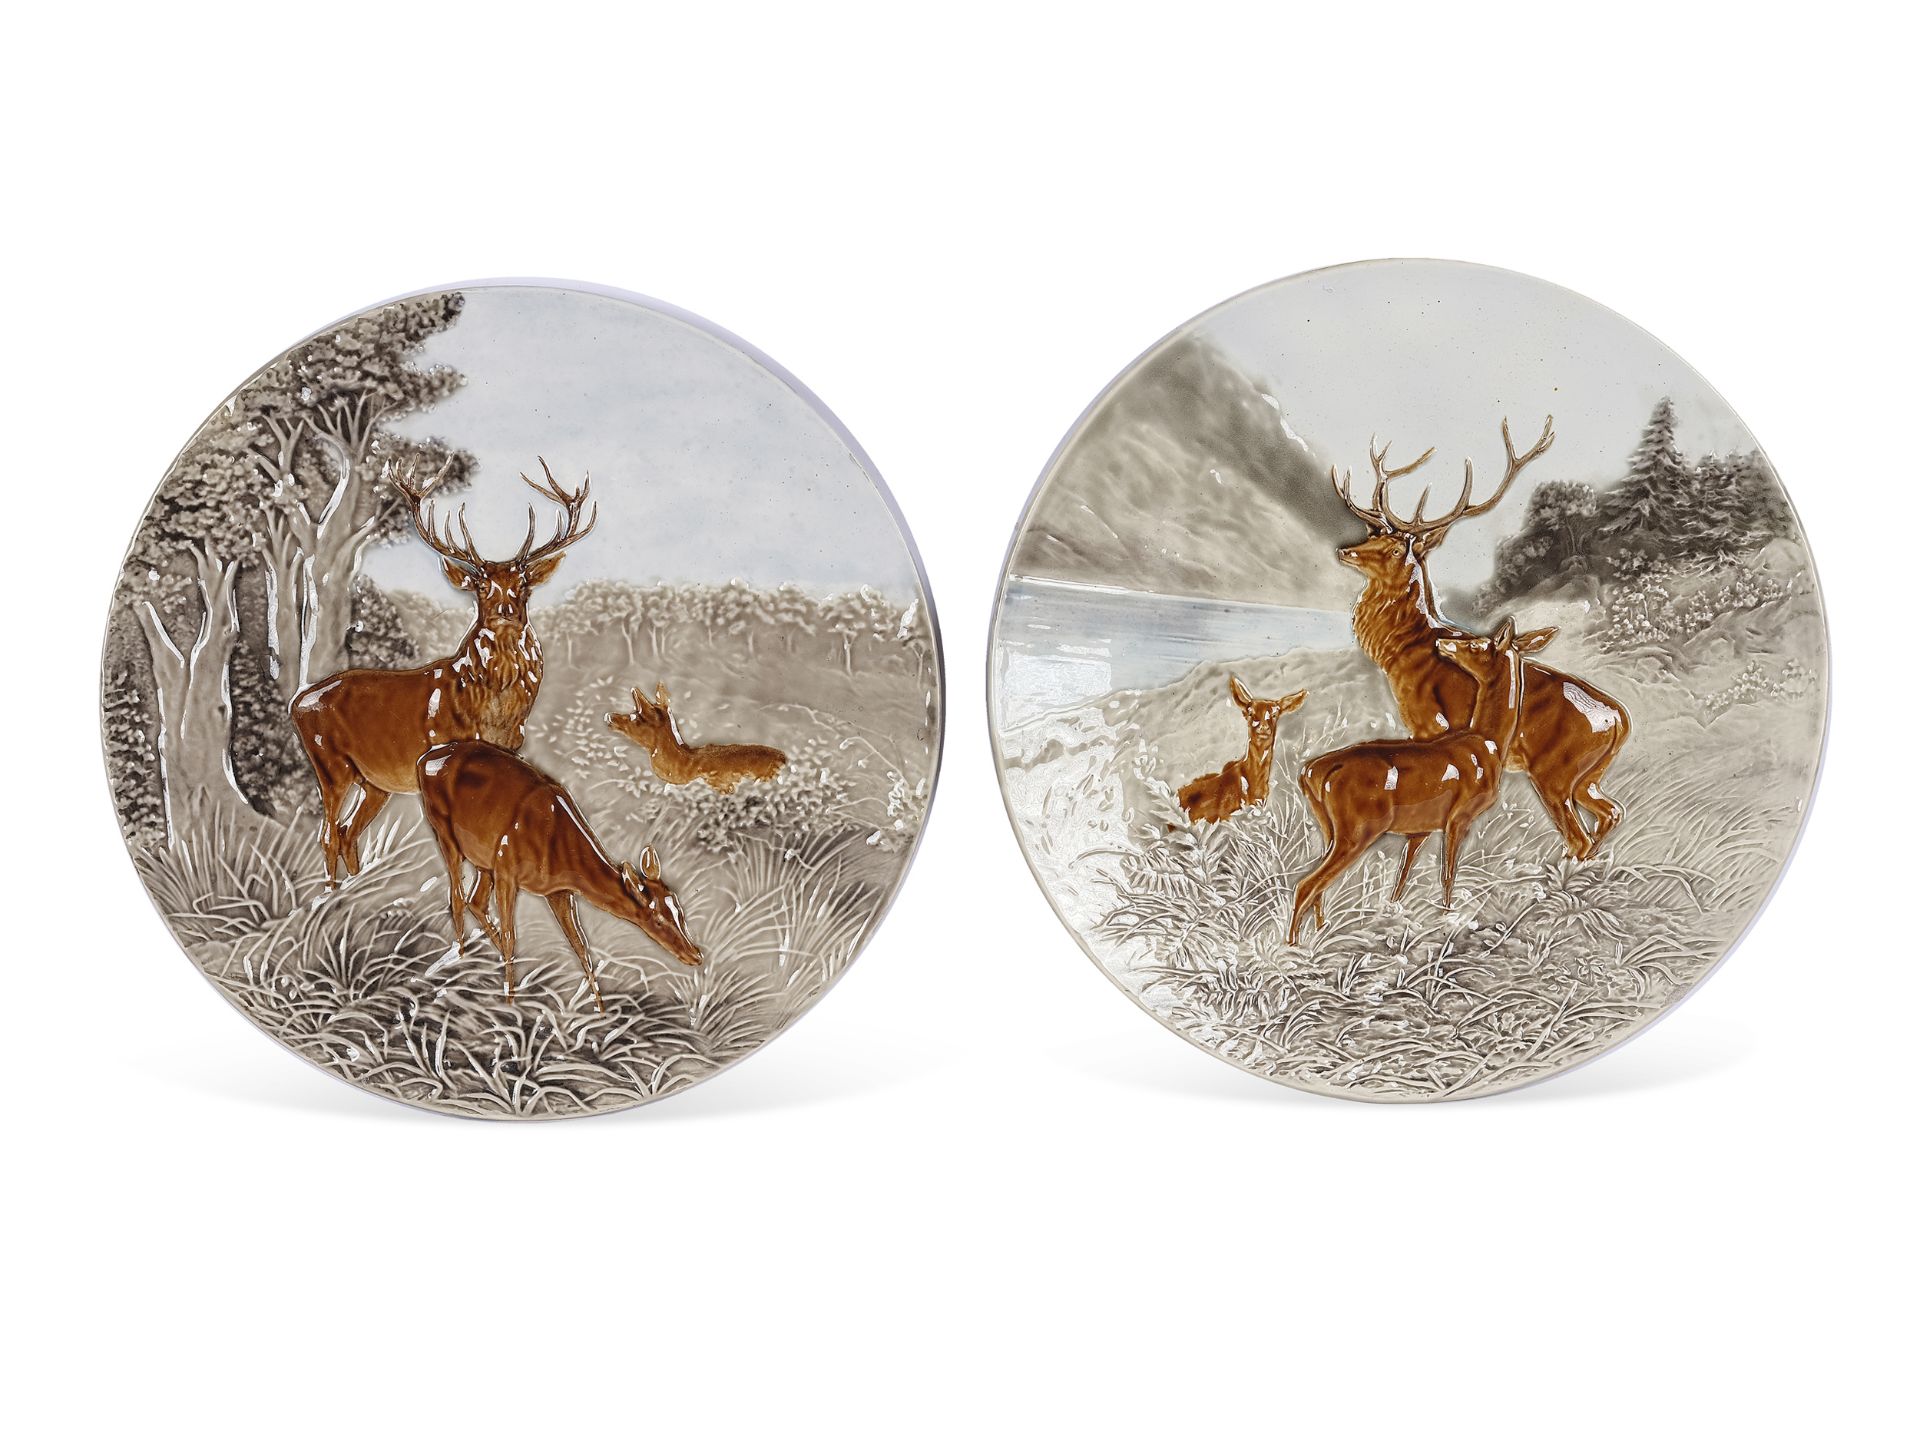 Pair of plates, relief depictions of red deer